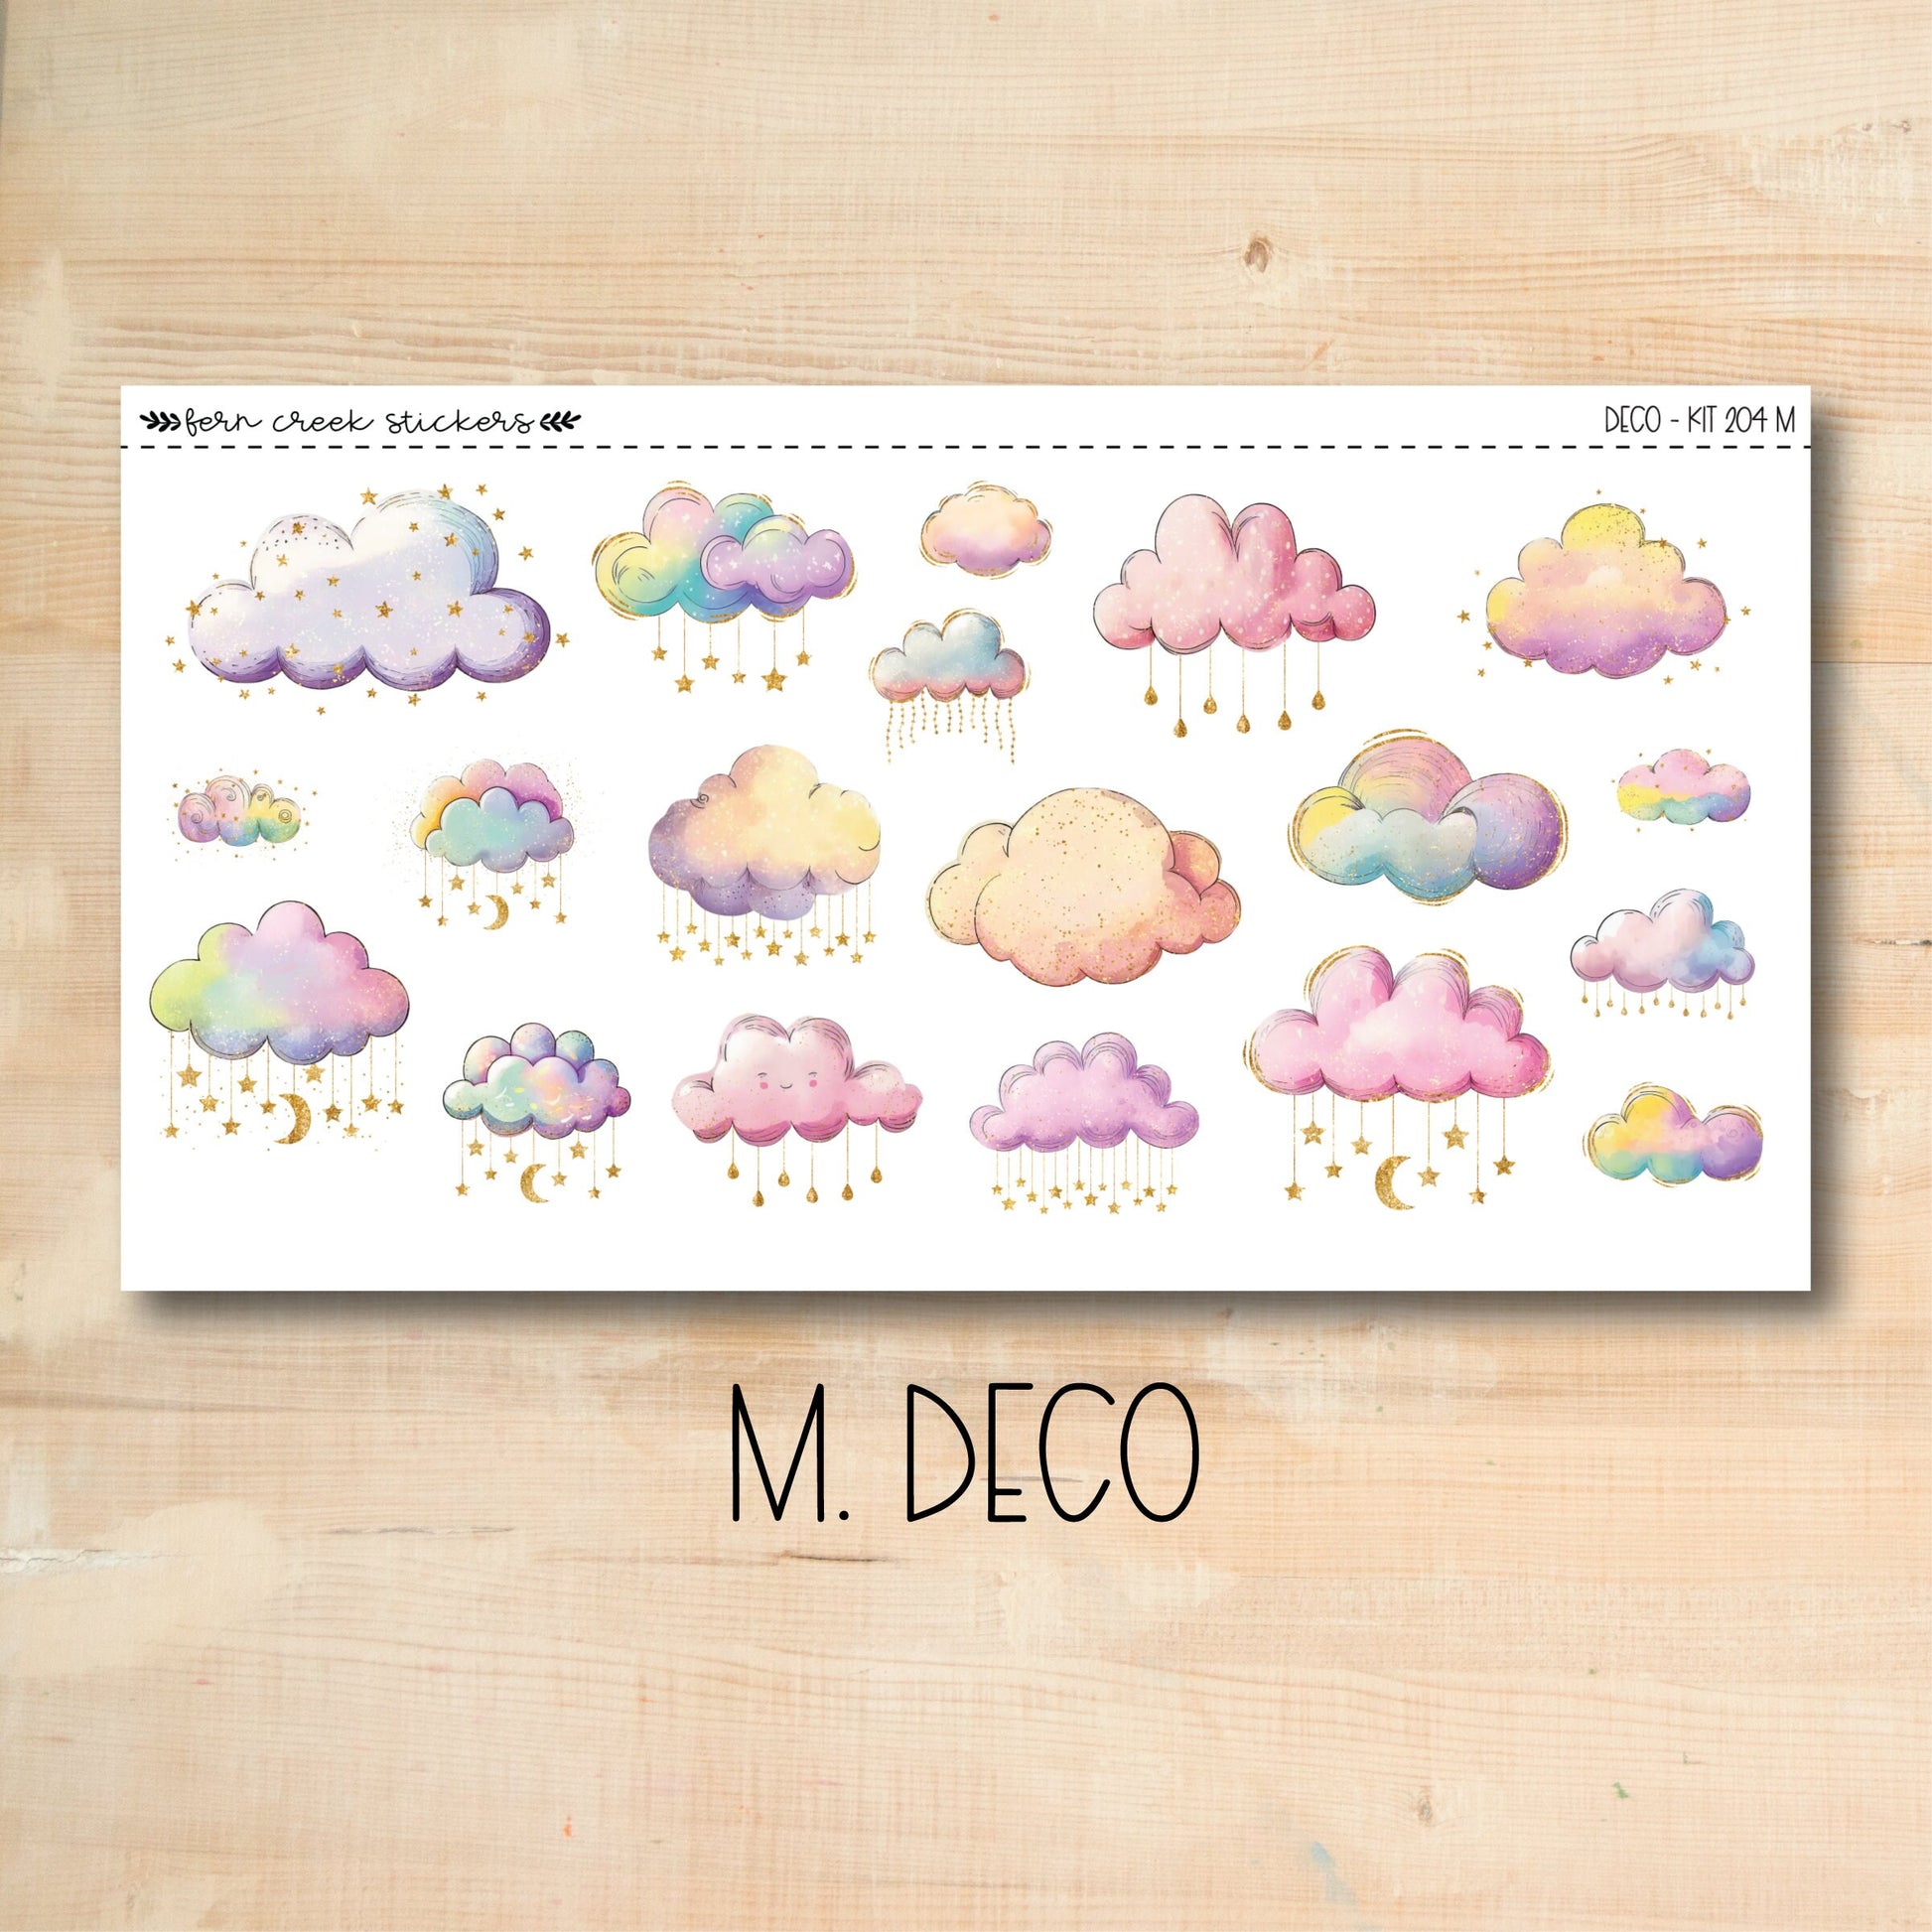 a sticker of clouds and rain on a wooden surface